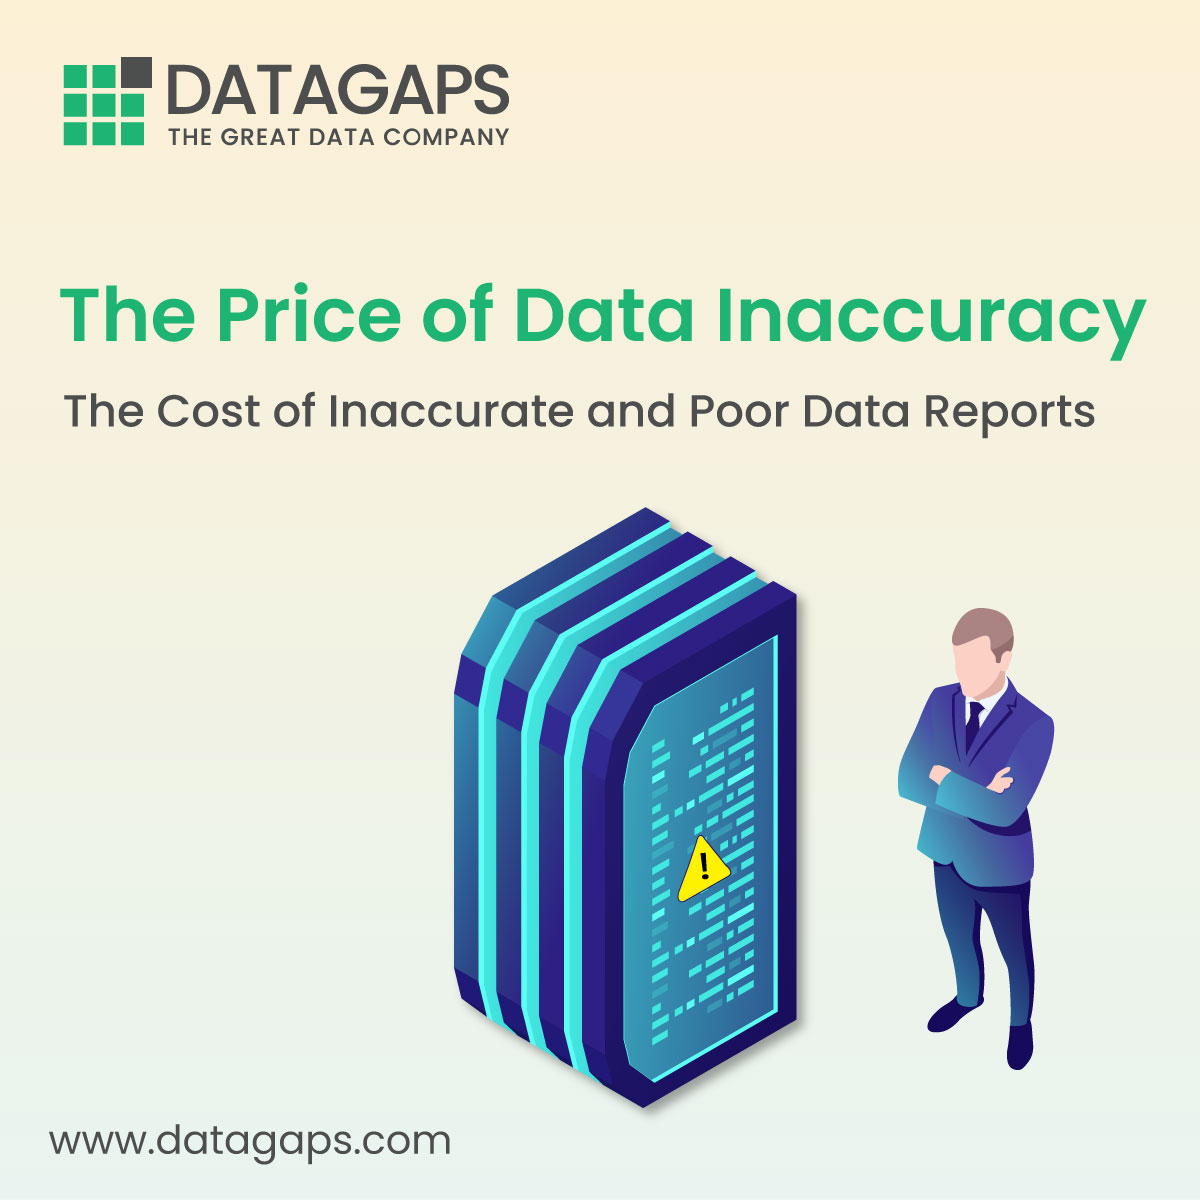 Avoid the high cost of data errors with ETL Testing Automation. 💸🔍
datagaps.com/dataops-data-q…
#DataAccuracy #ETLTesting #DataIntegrity #AI #DataQuality